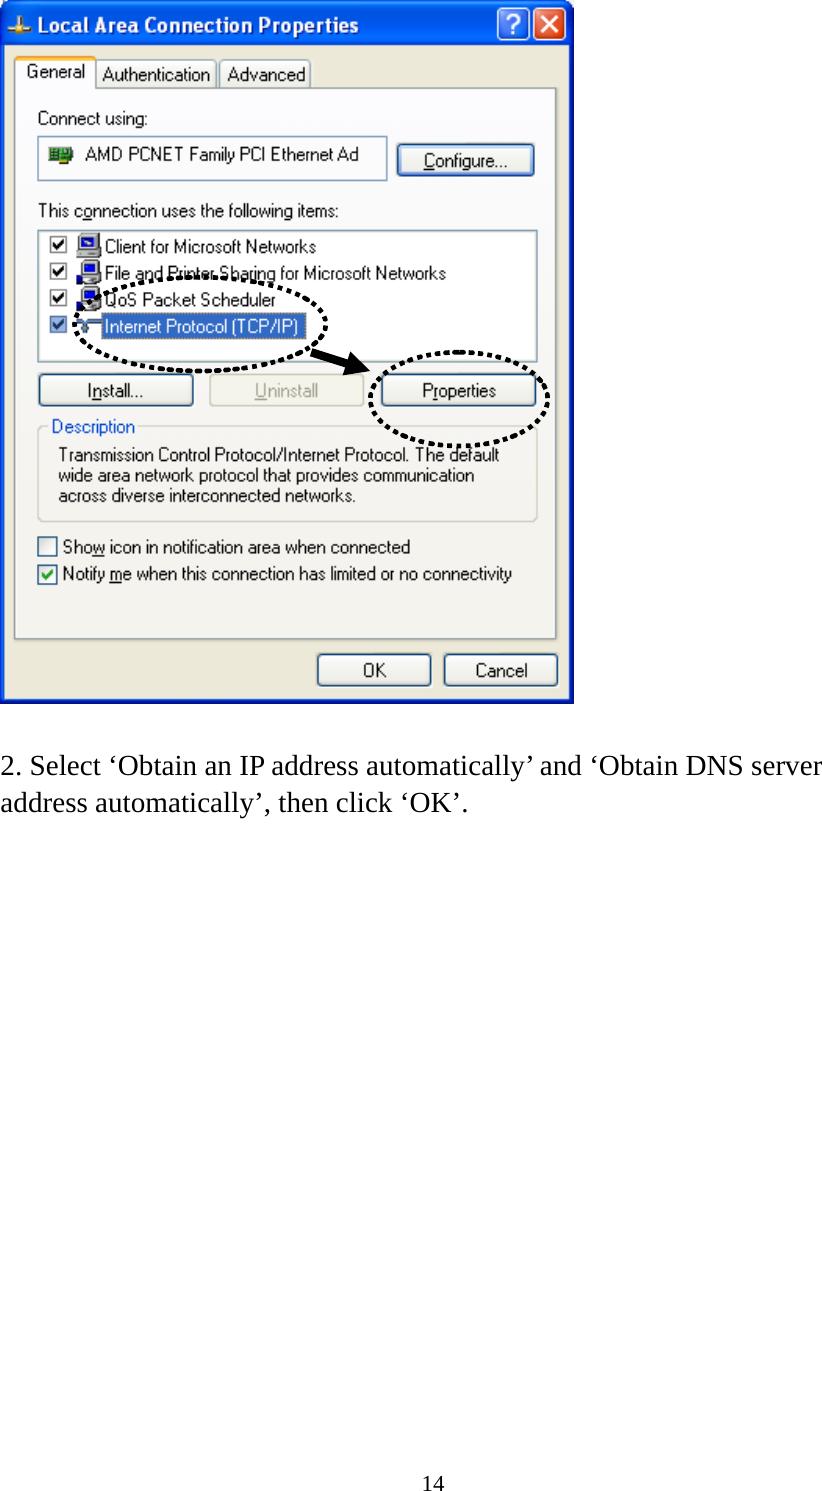 14   2. Select ‘Obtain an IP address automatically’ and ‘Obtain DNS server address automatically’, then click ‘OK’. 